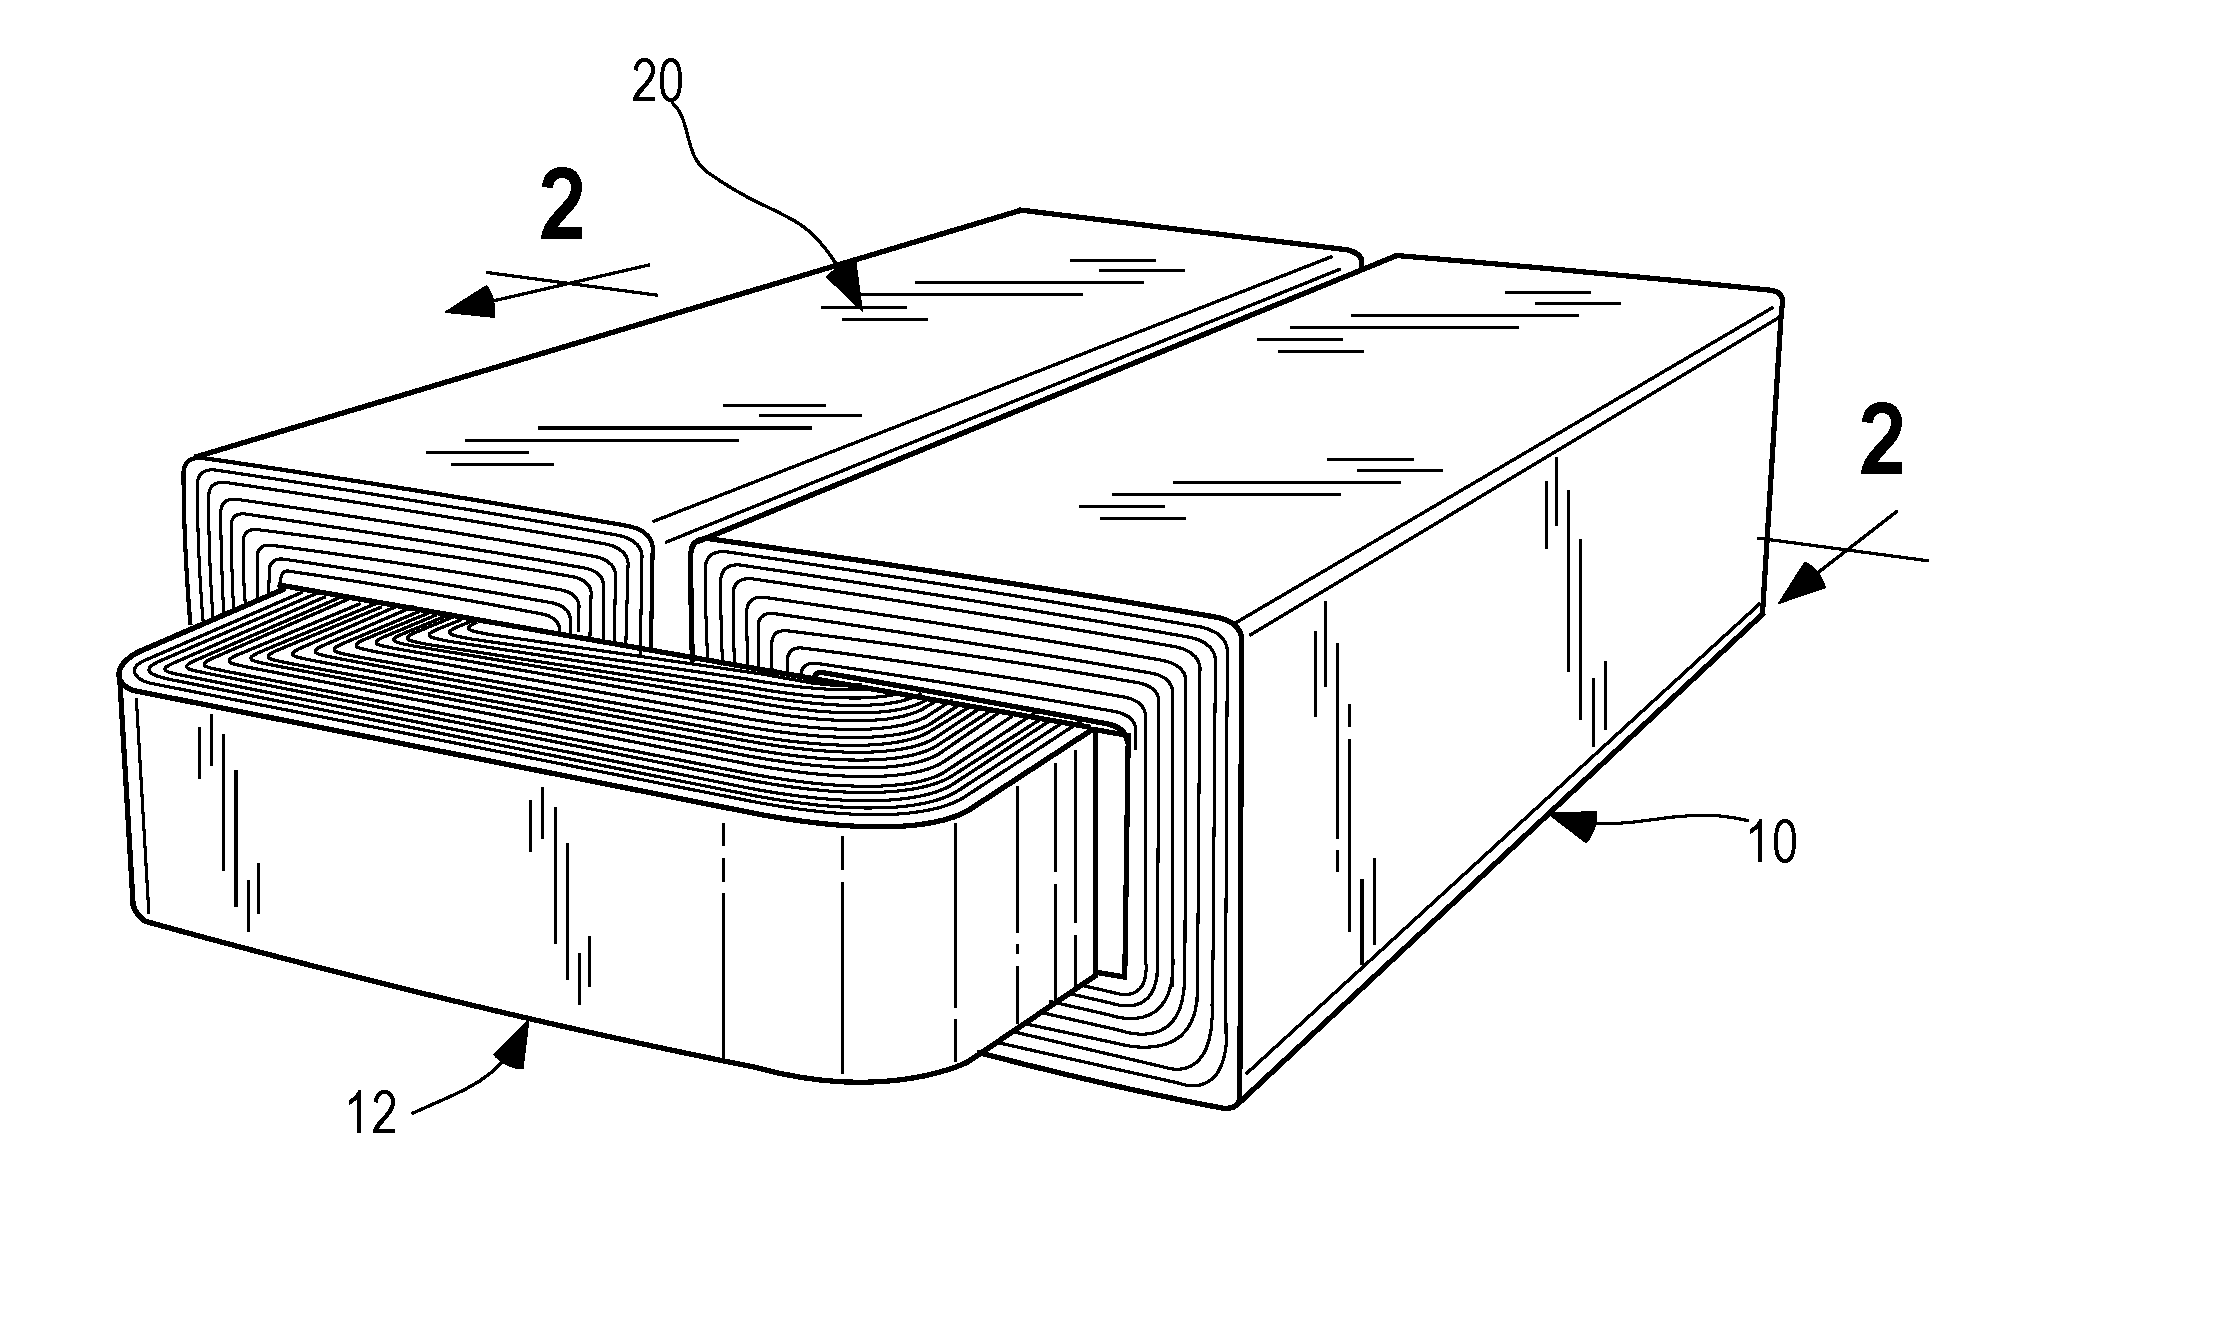 Electromagnetic device having layered magnetic material components and methods for making same